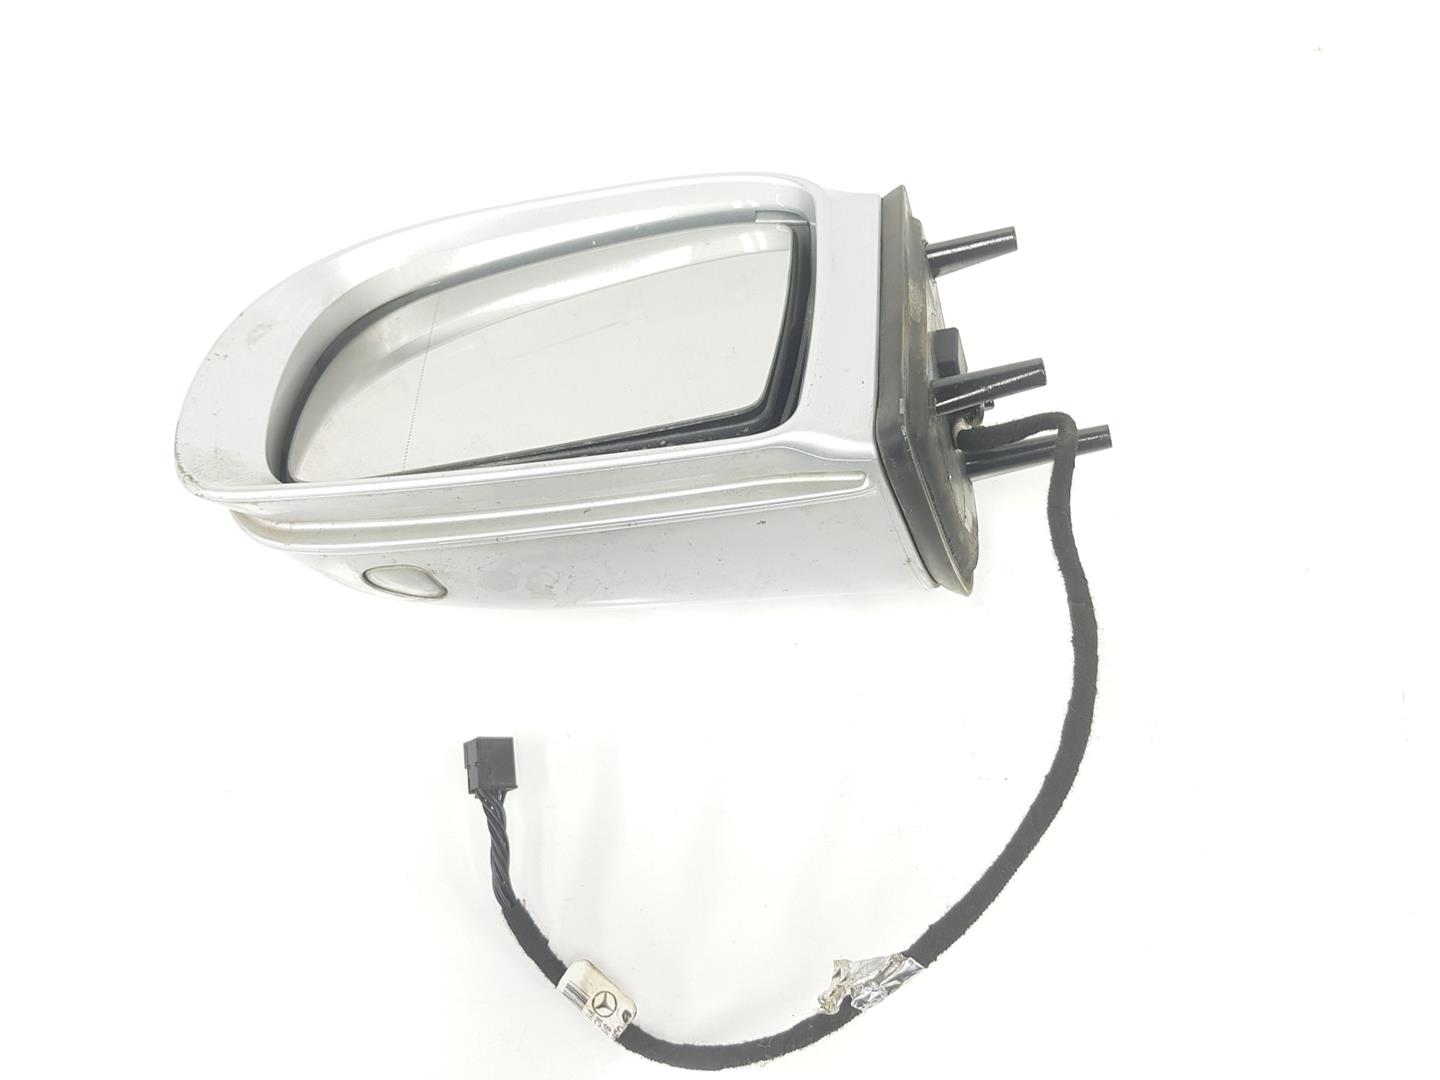 MERCEDES-BENZ M-Class W164 (2005-2011) Left Side Wing Mirror A1648100193, A1648100193, COLORPLATA775 24251630